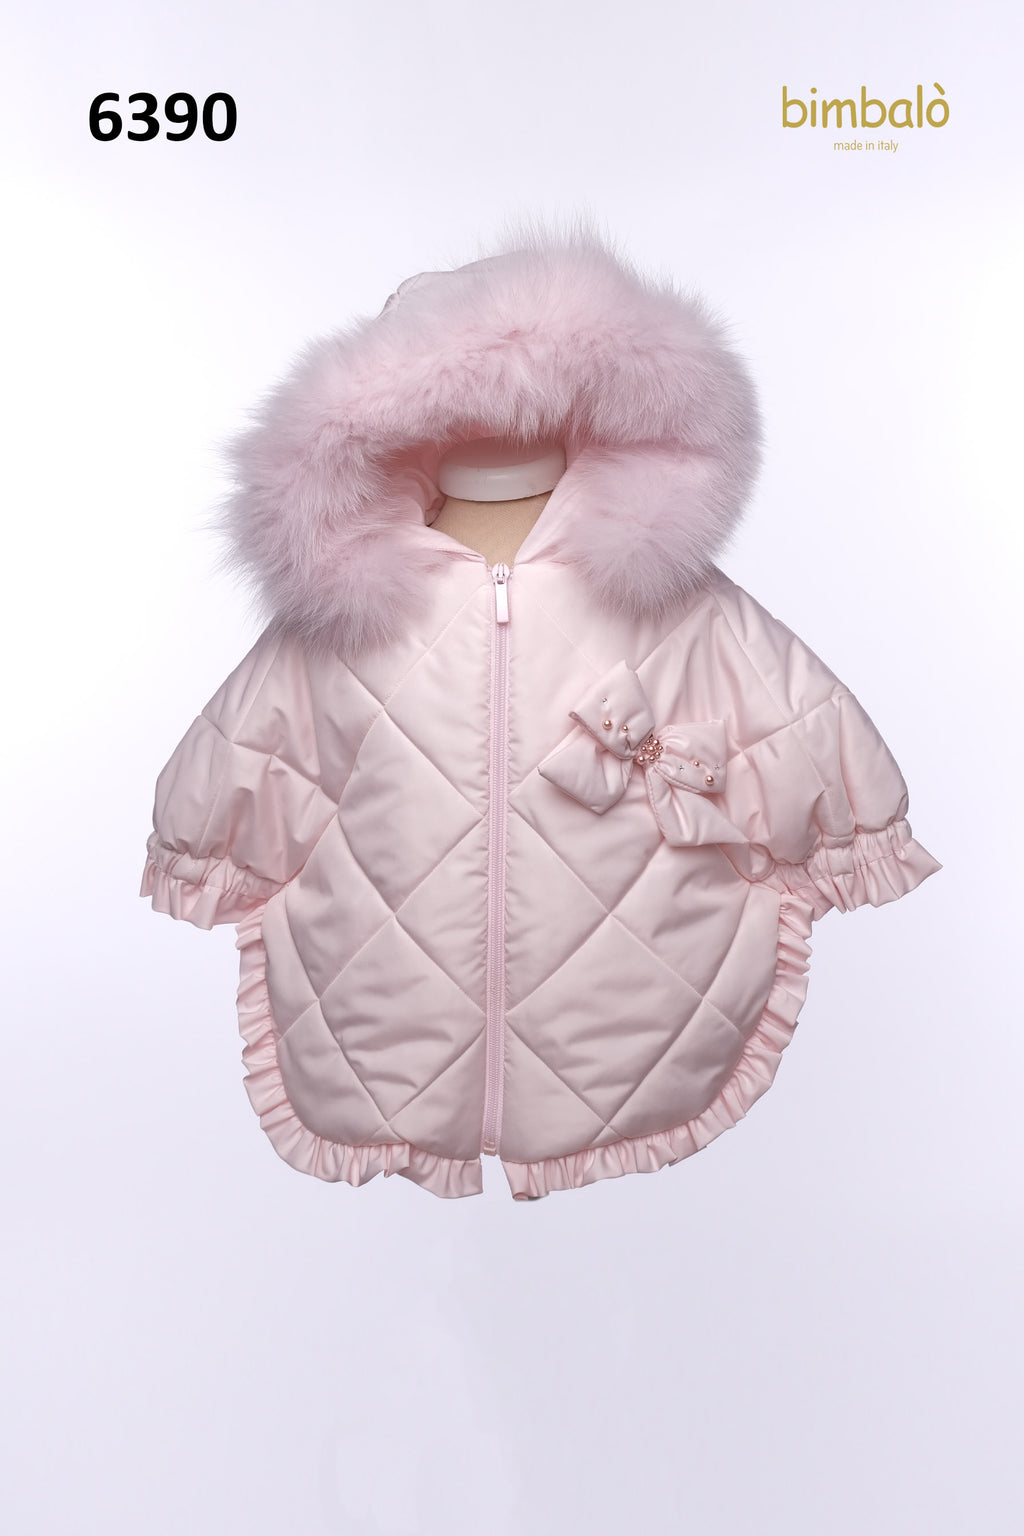 AW22 Bimbalò Pale Pink Quilted Bow Poncho Cape Coat With Fur Hood